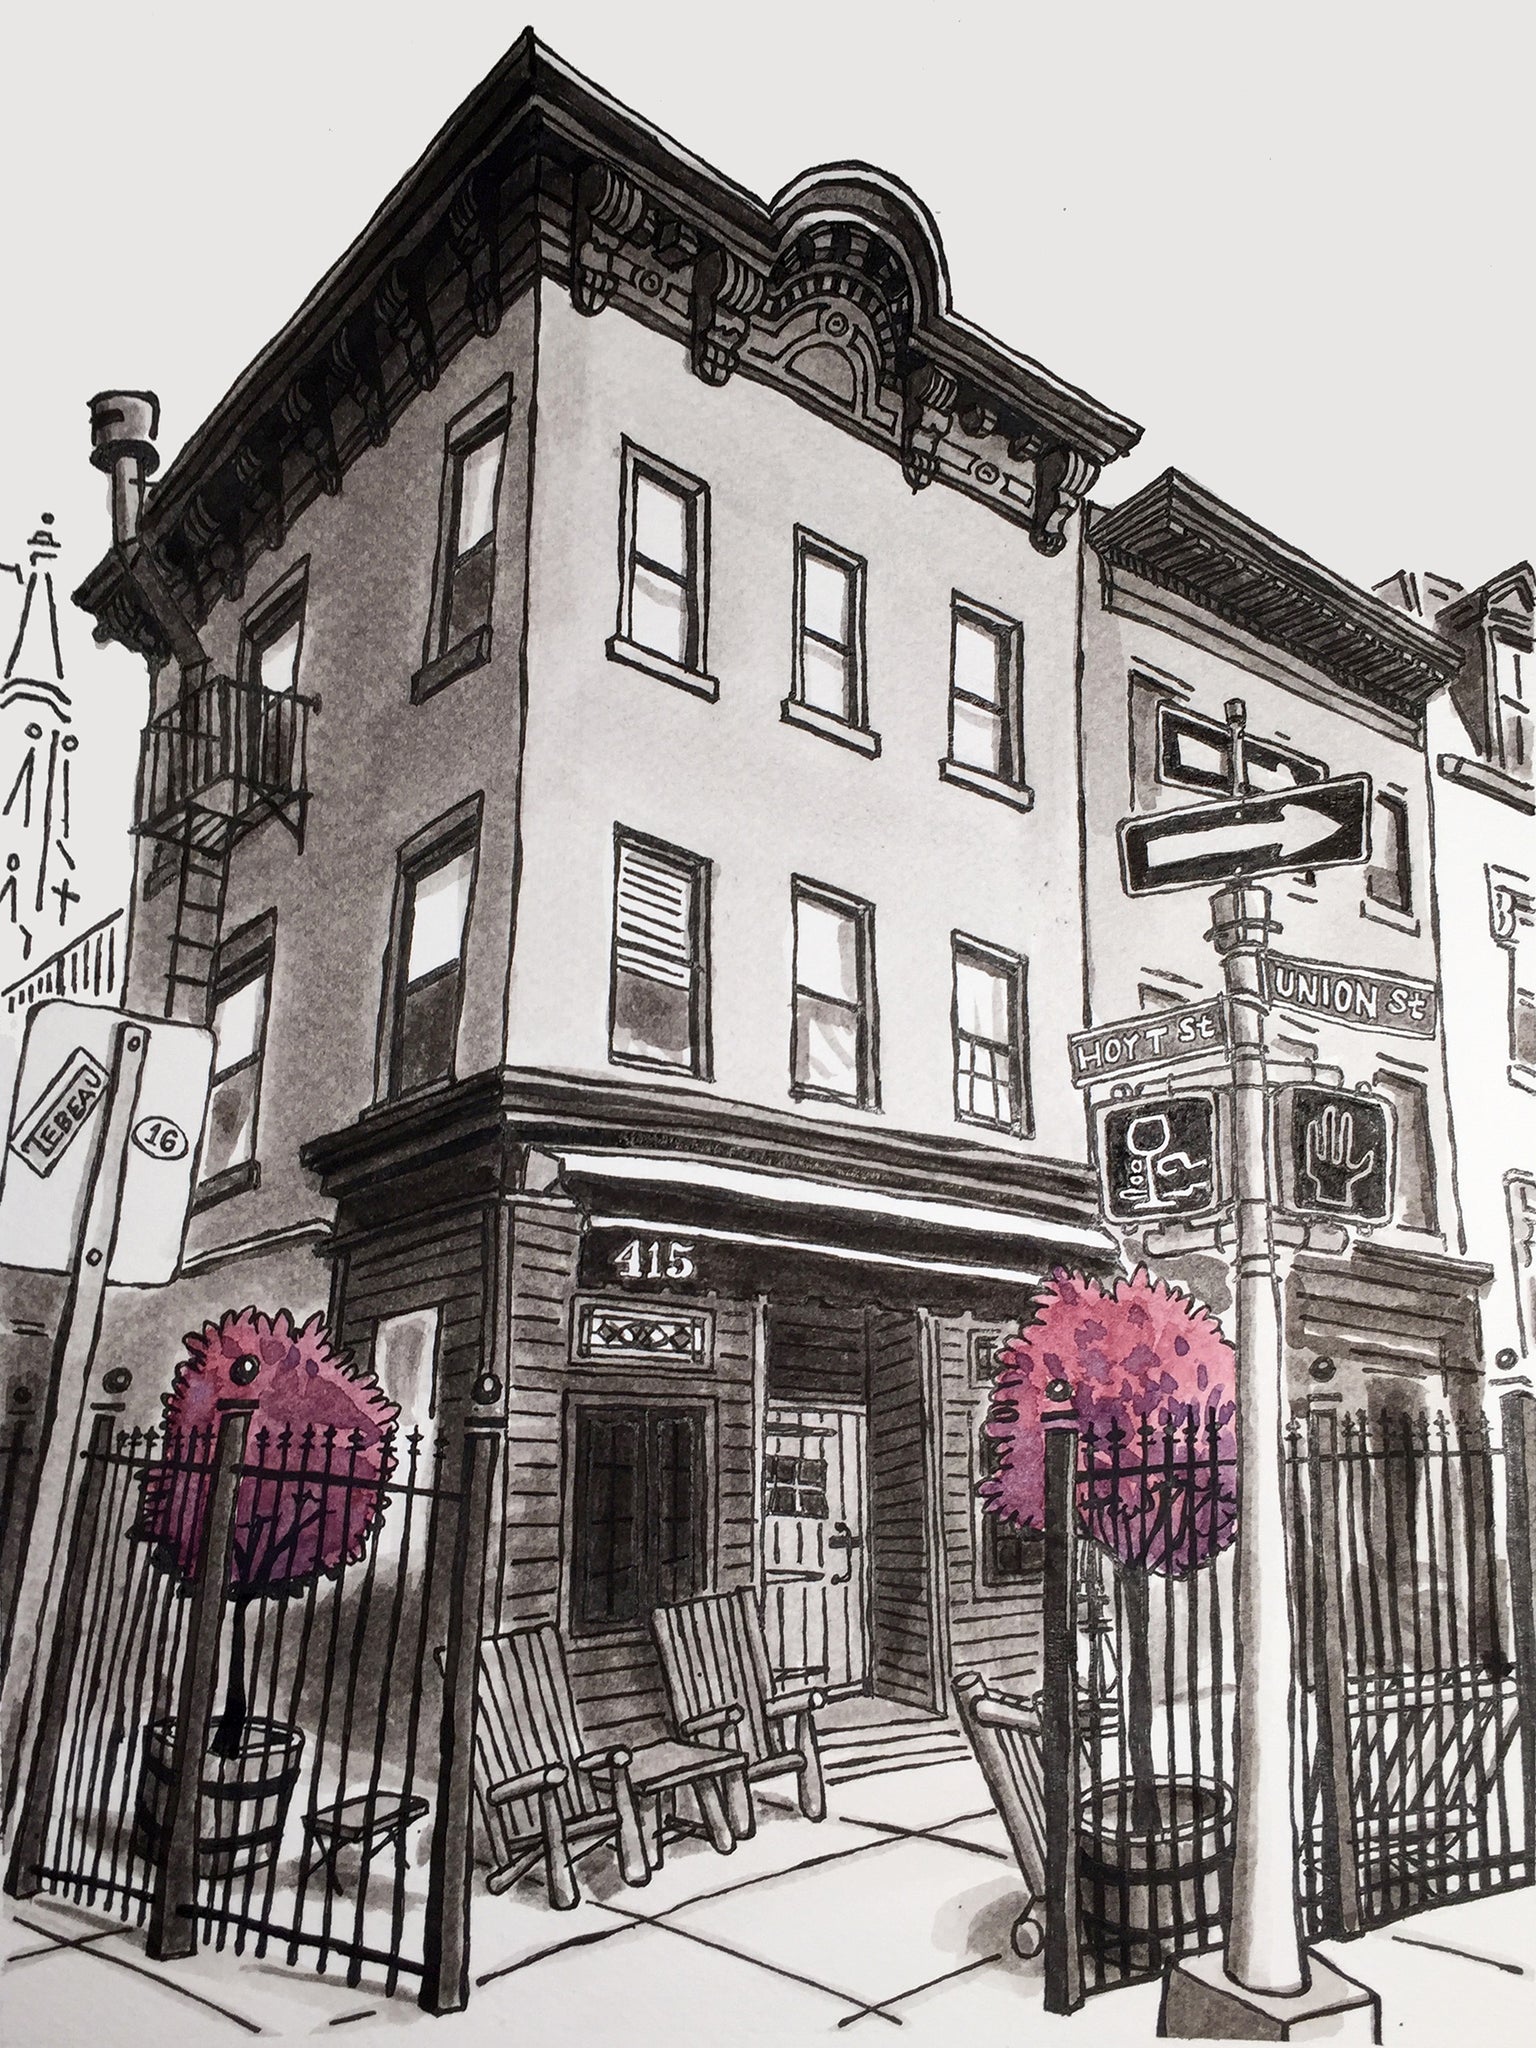 Black Mountain Wine House of Brooklyn, New York signed prints. (ships free in the US)